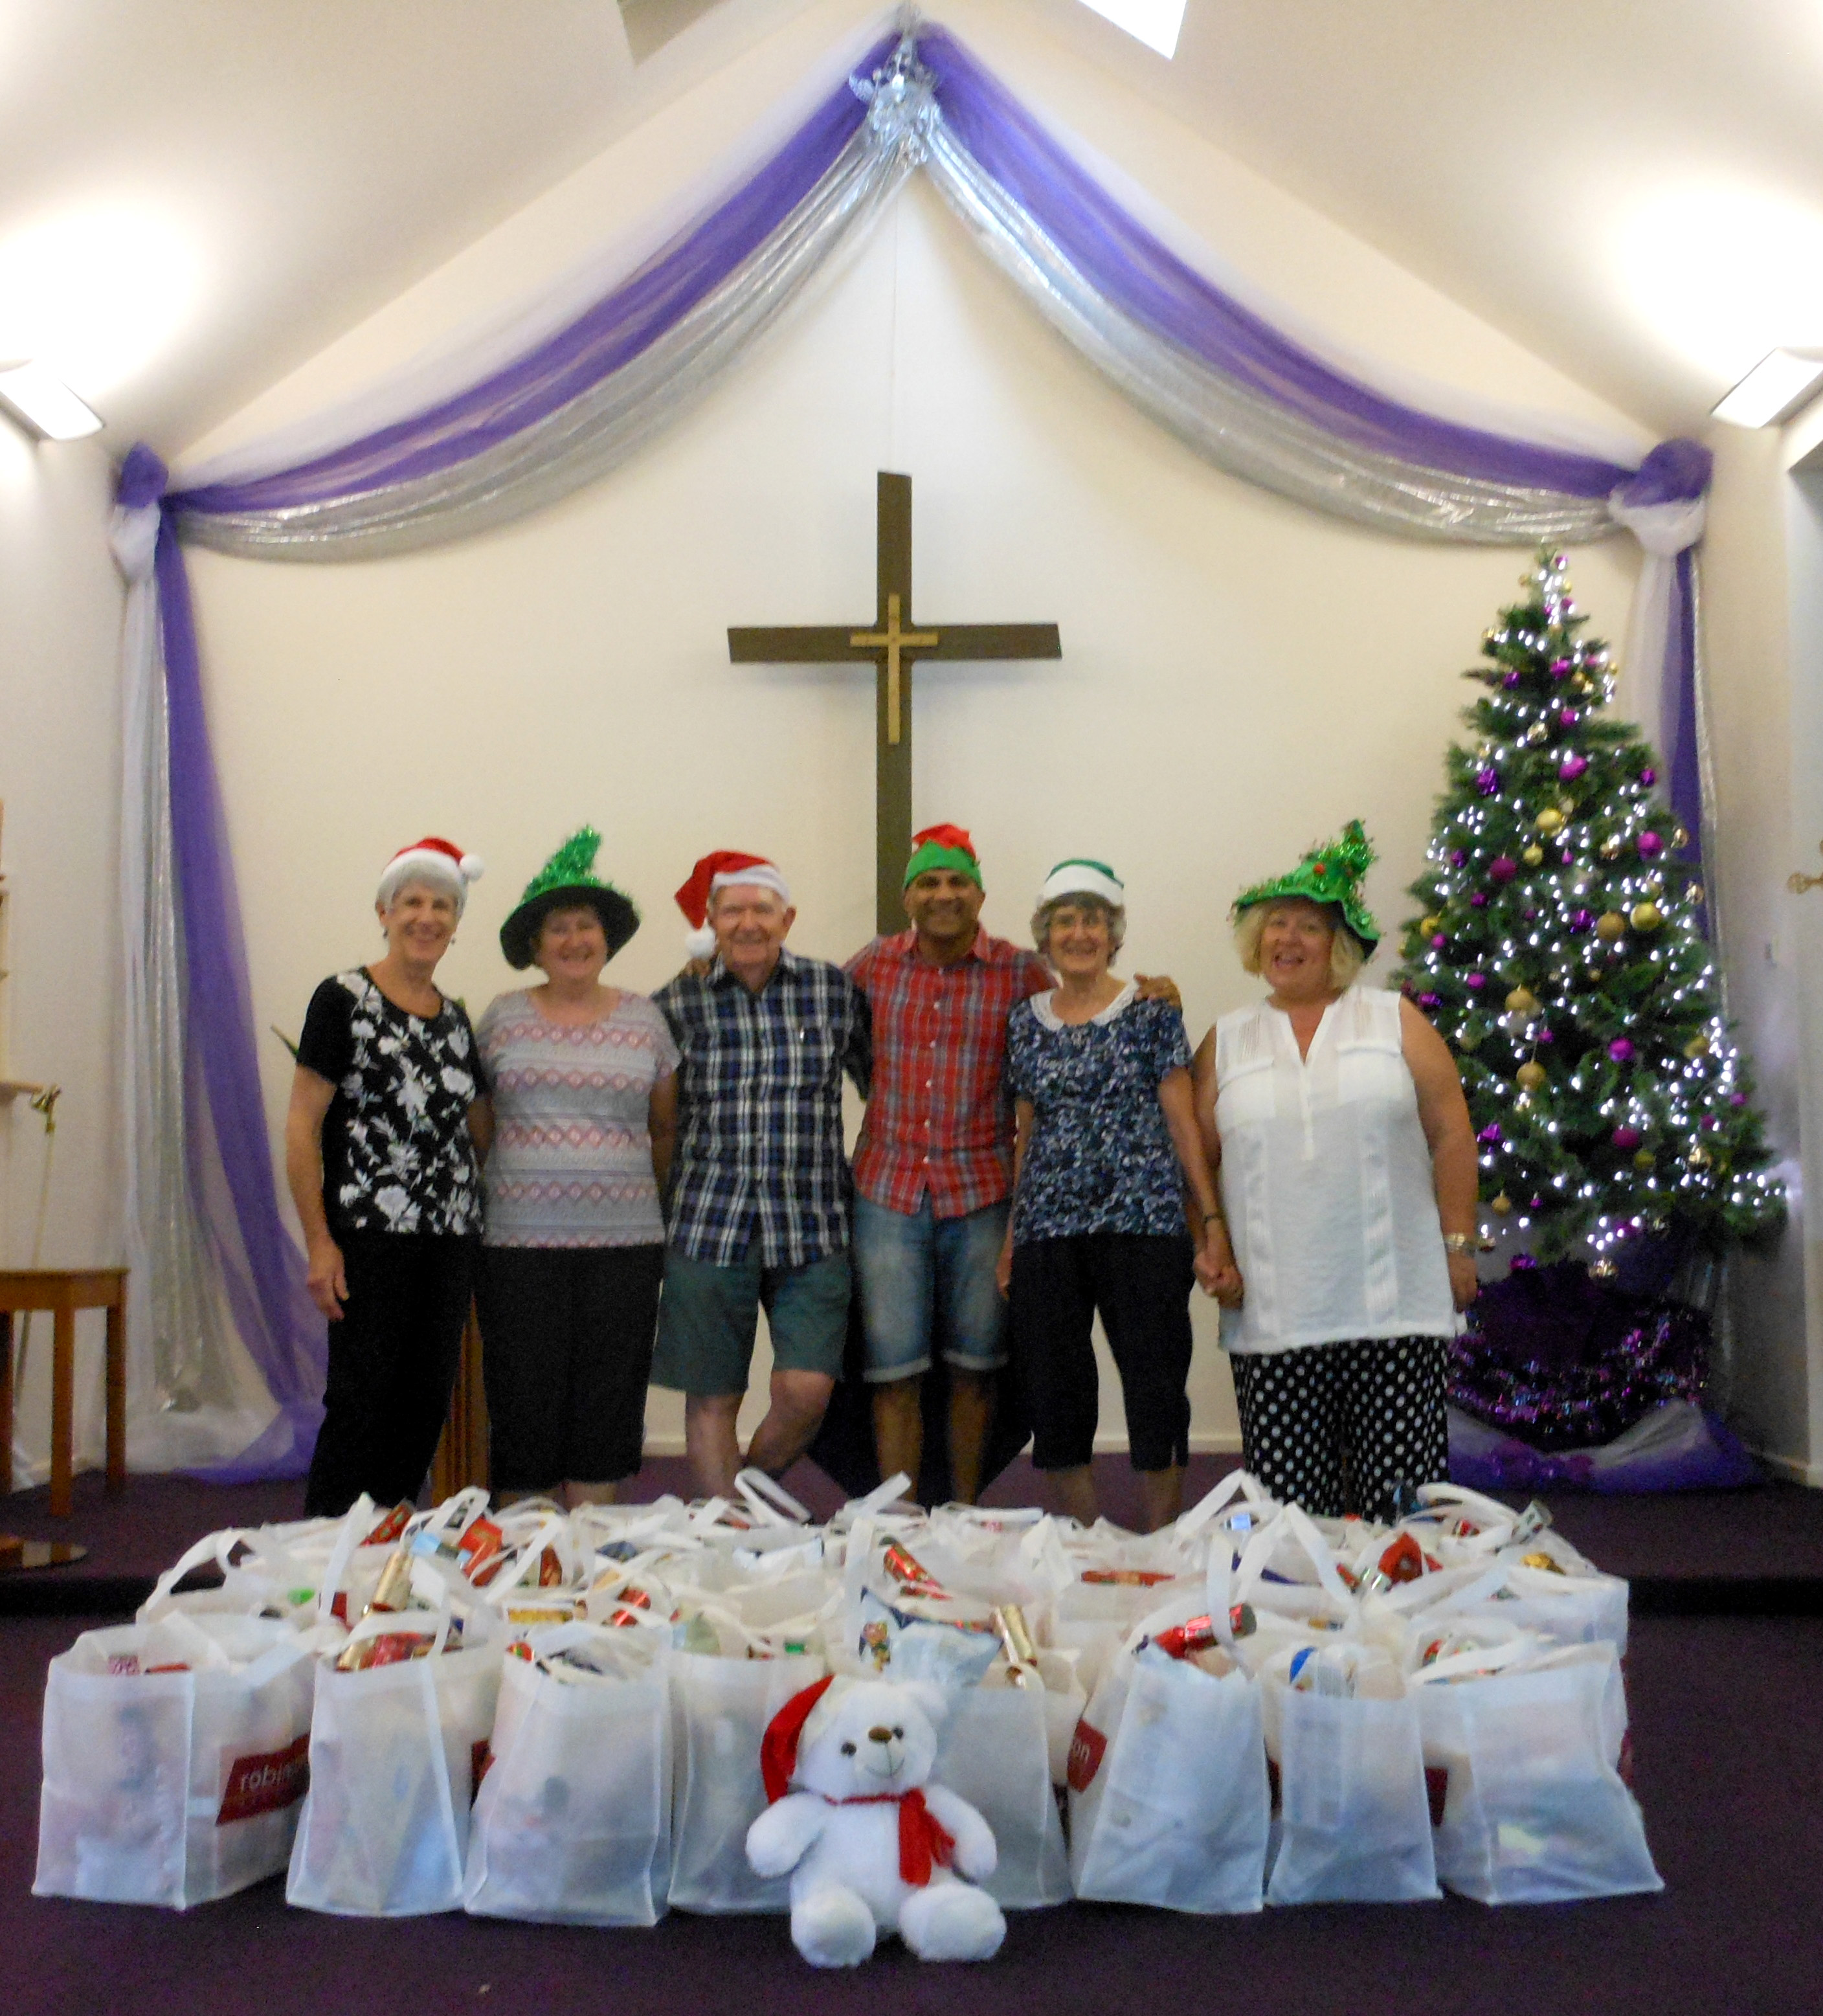 Hampers all ready to give to 100 needy families in the  area,  Rev Kesh Govan and Parishioners of All Saints.  Photo by Kesh Govan